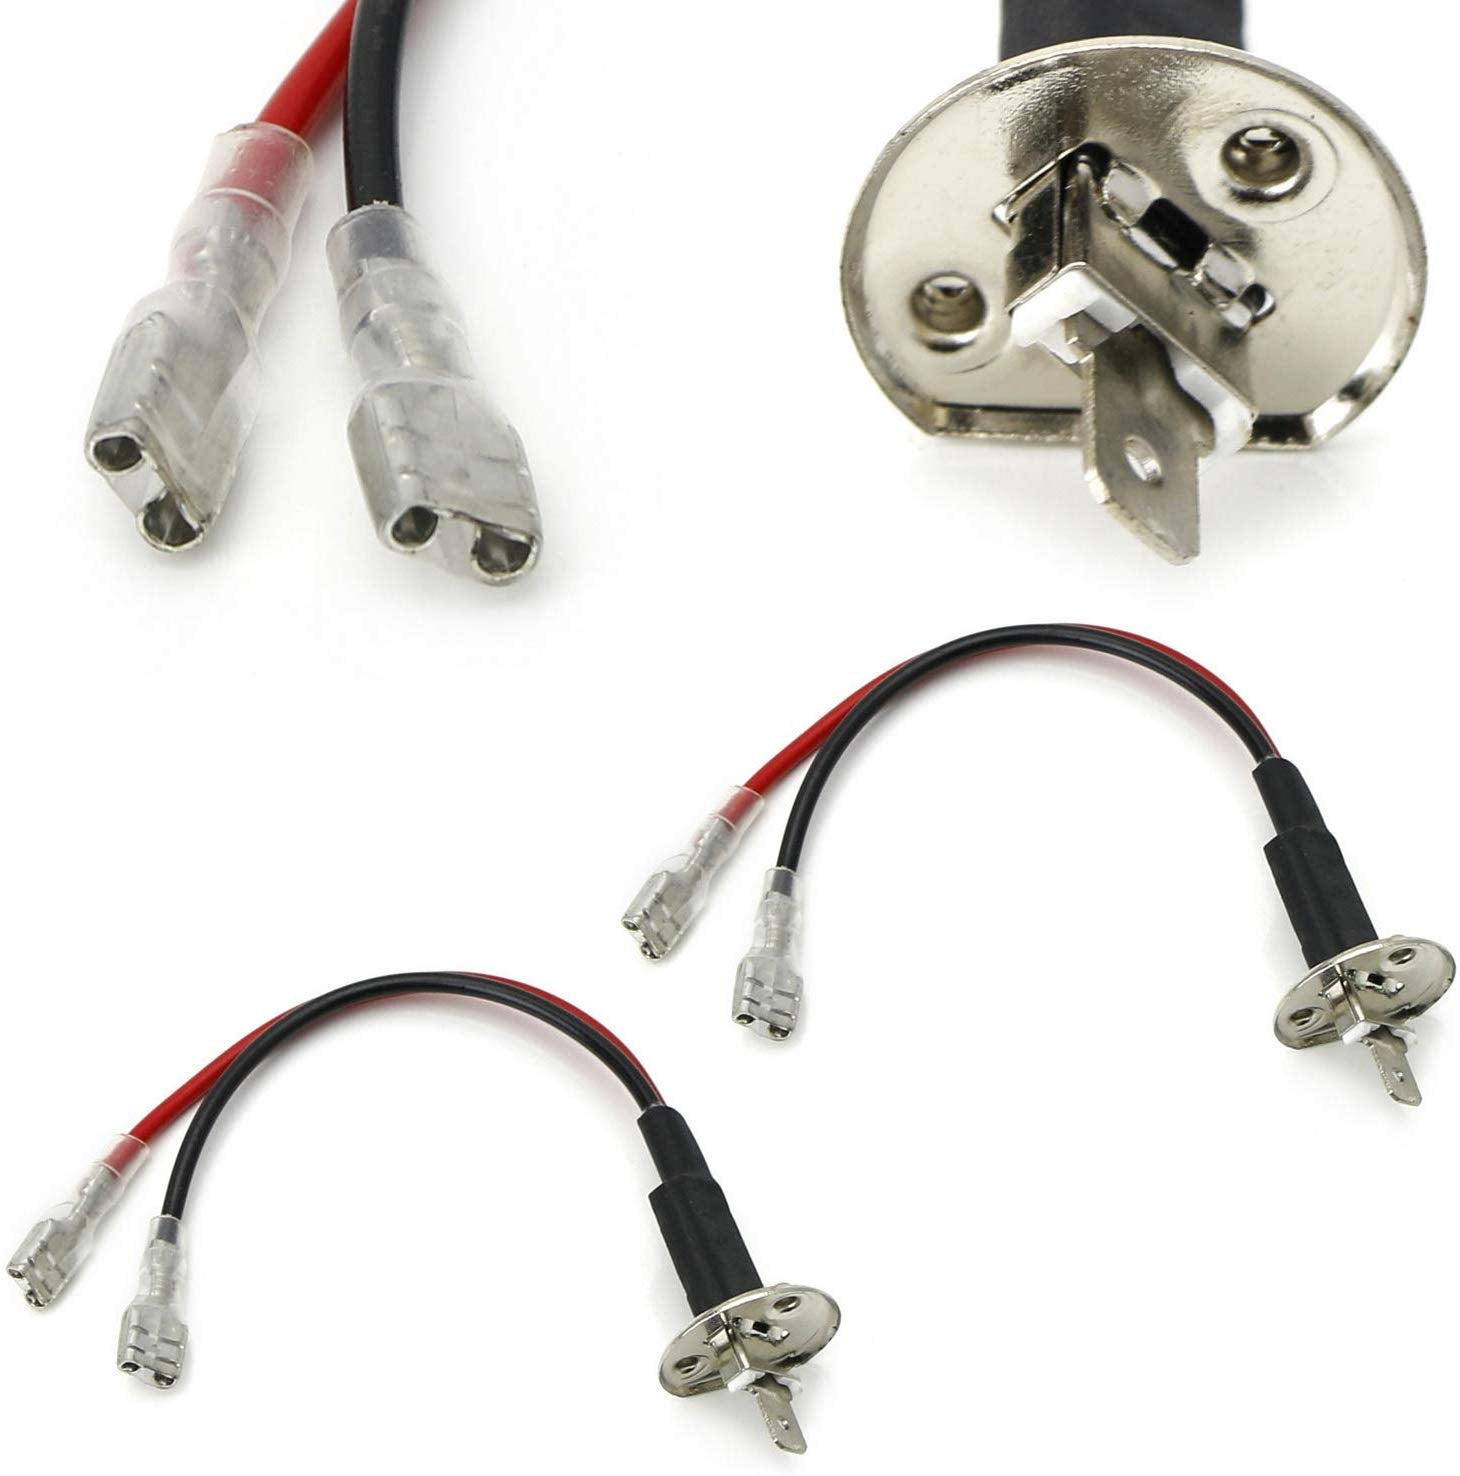 iJDMTOY (2) OEM H3 Socket/Adapter Wires For HID or LED Headlight Bulbs Installation Convesion